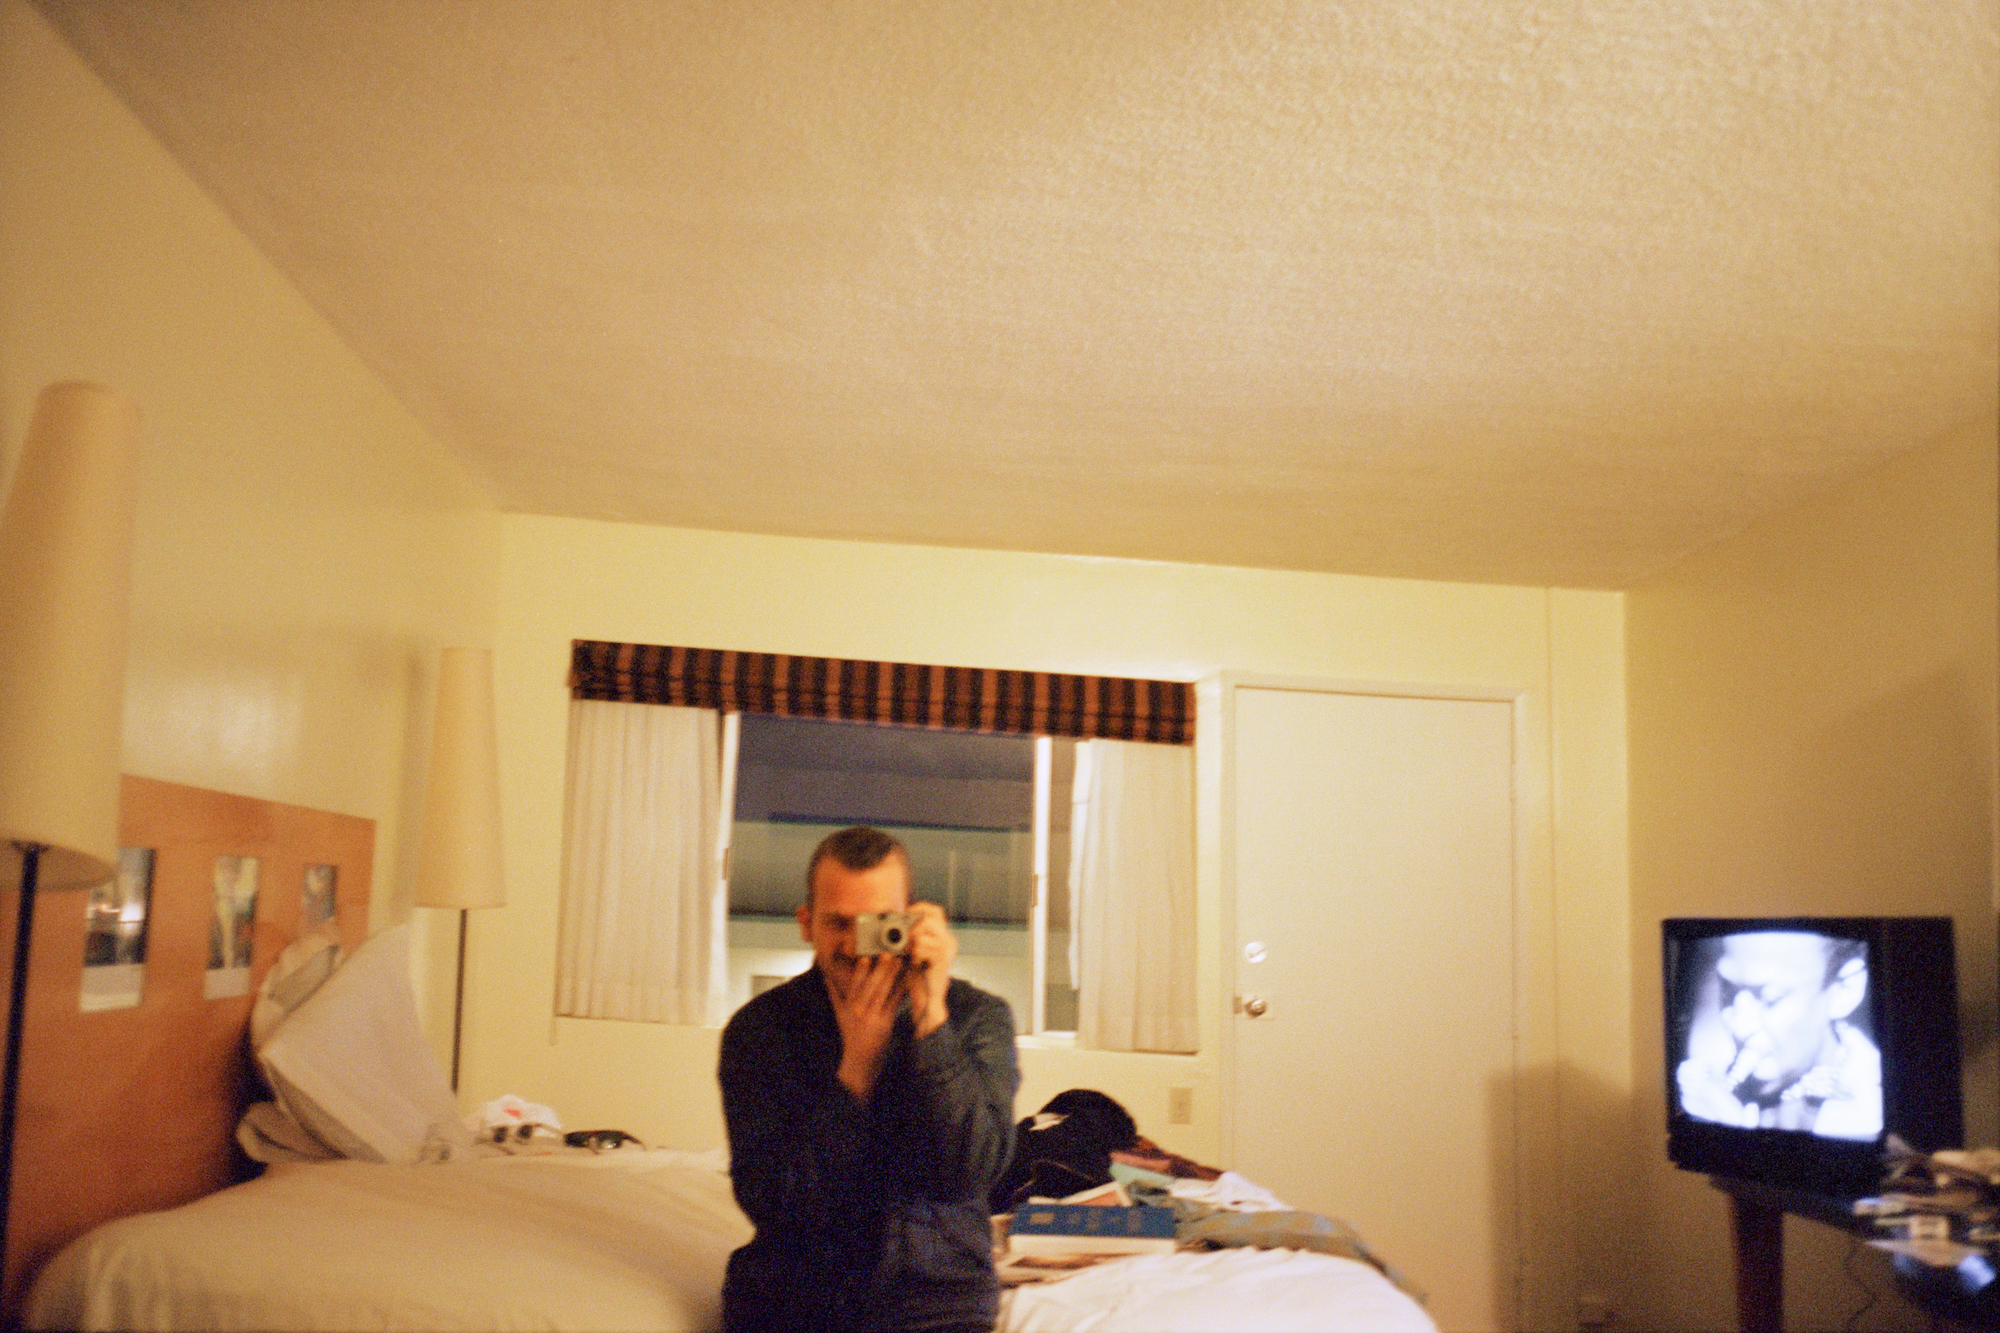 self portrait in a hotel room by photographer jason dill